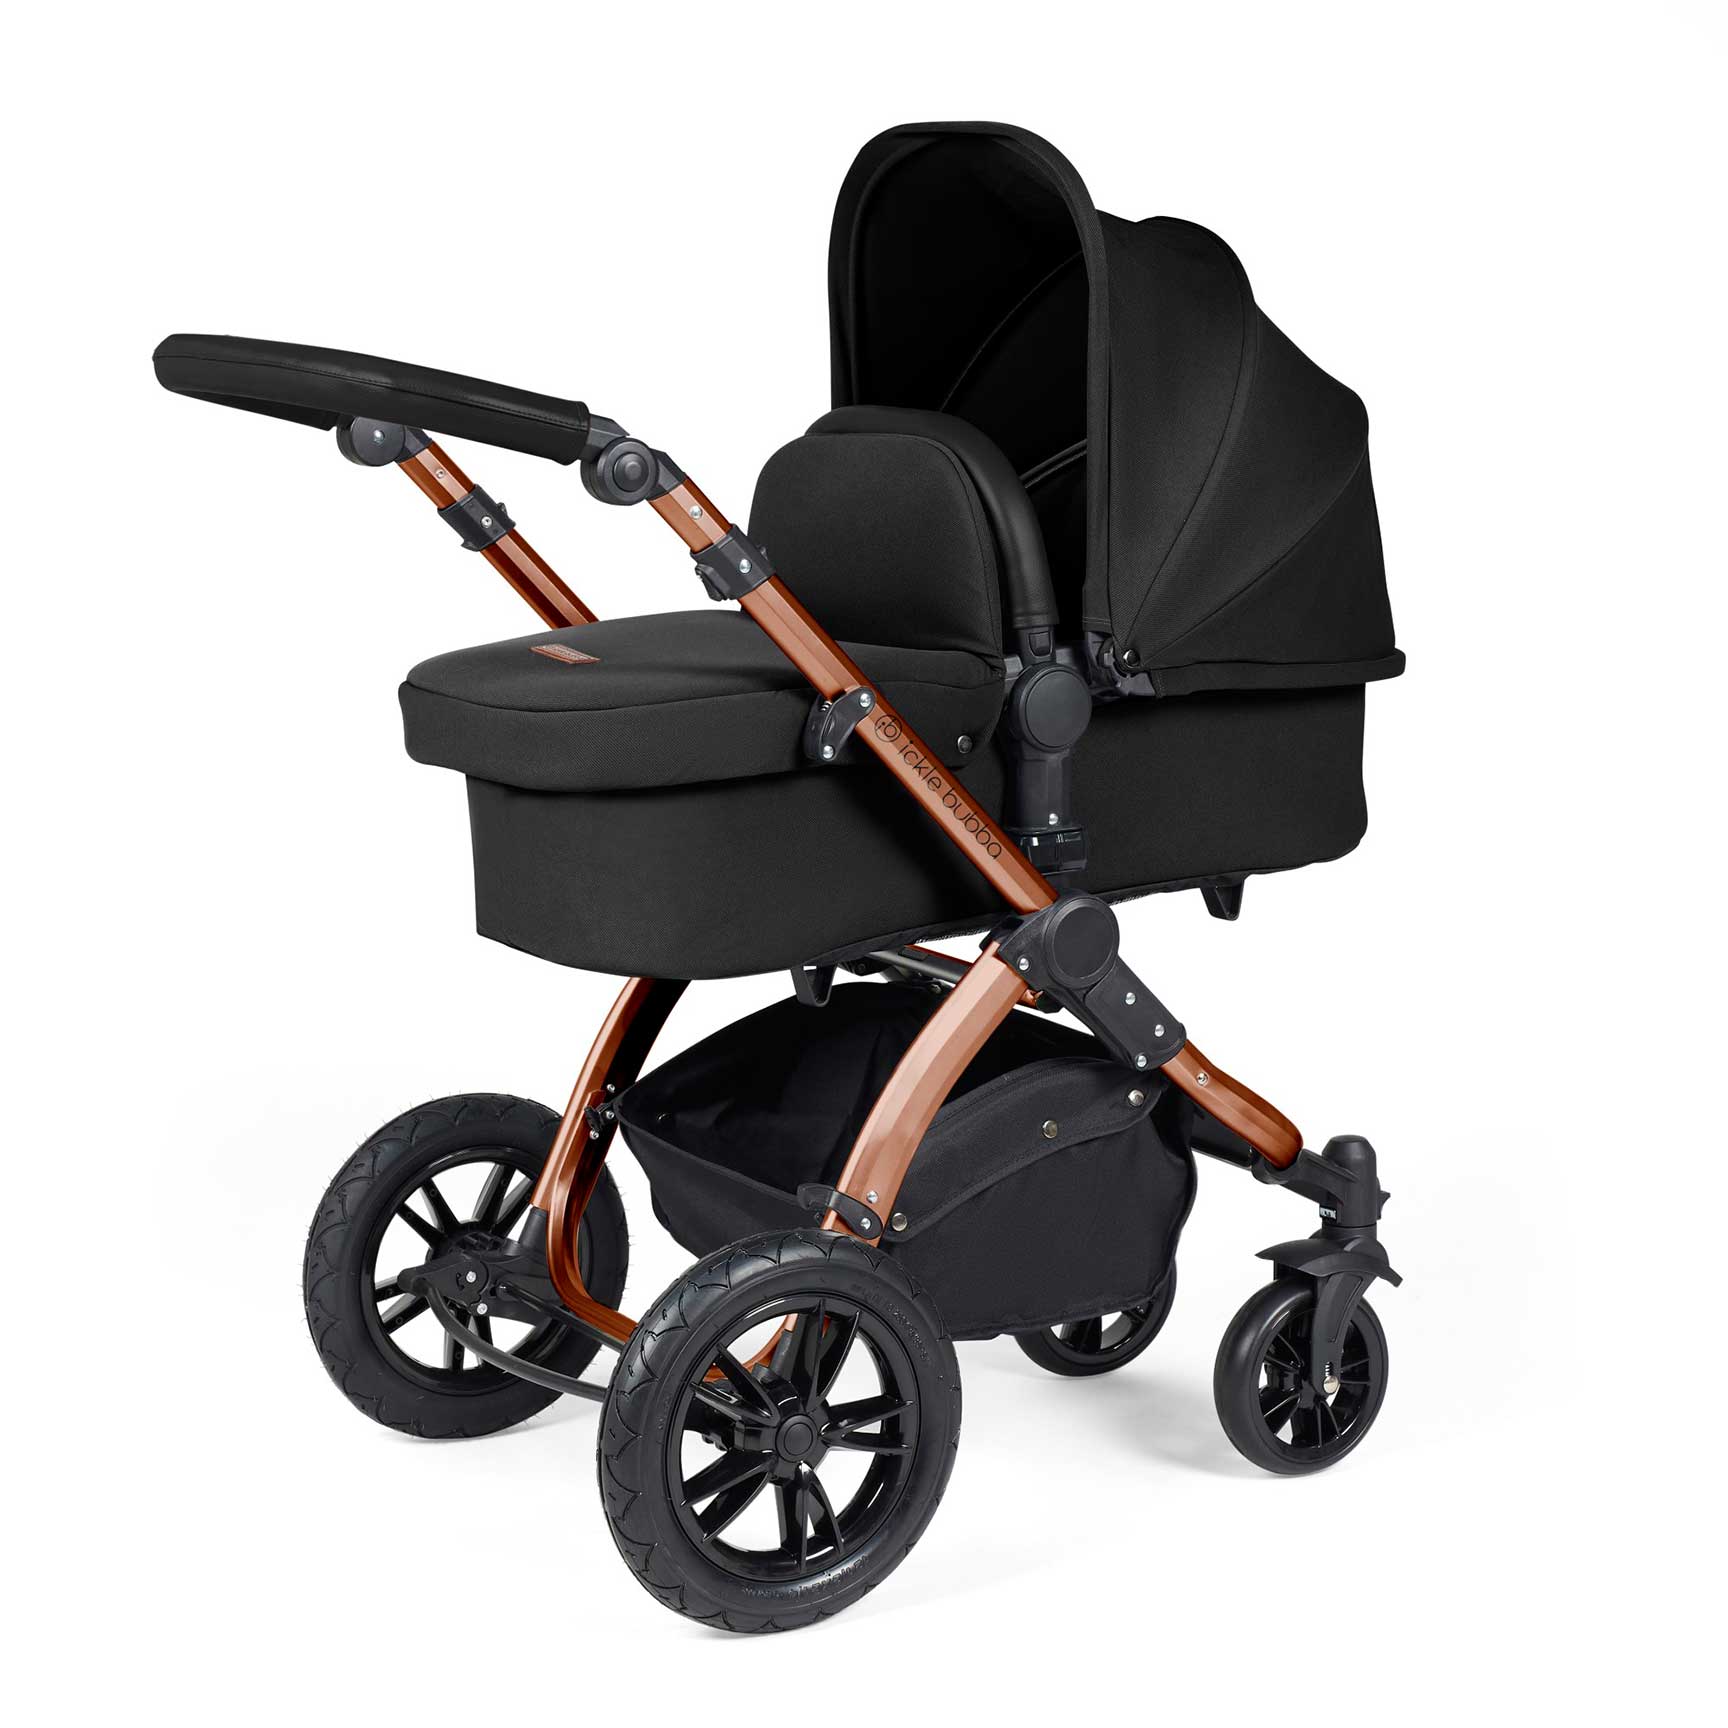 Ickle Bubba travel systems Ickle Bubba Stomp Luxe 2 in 1 Plus Pushchair & Carrycot - Bronze/Midnight/Black 10-003-001-139